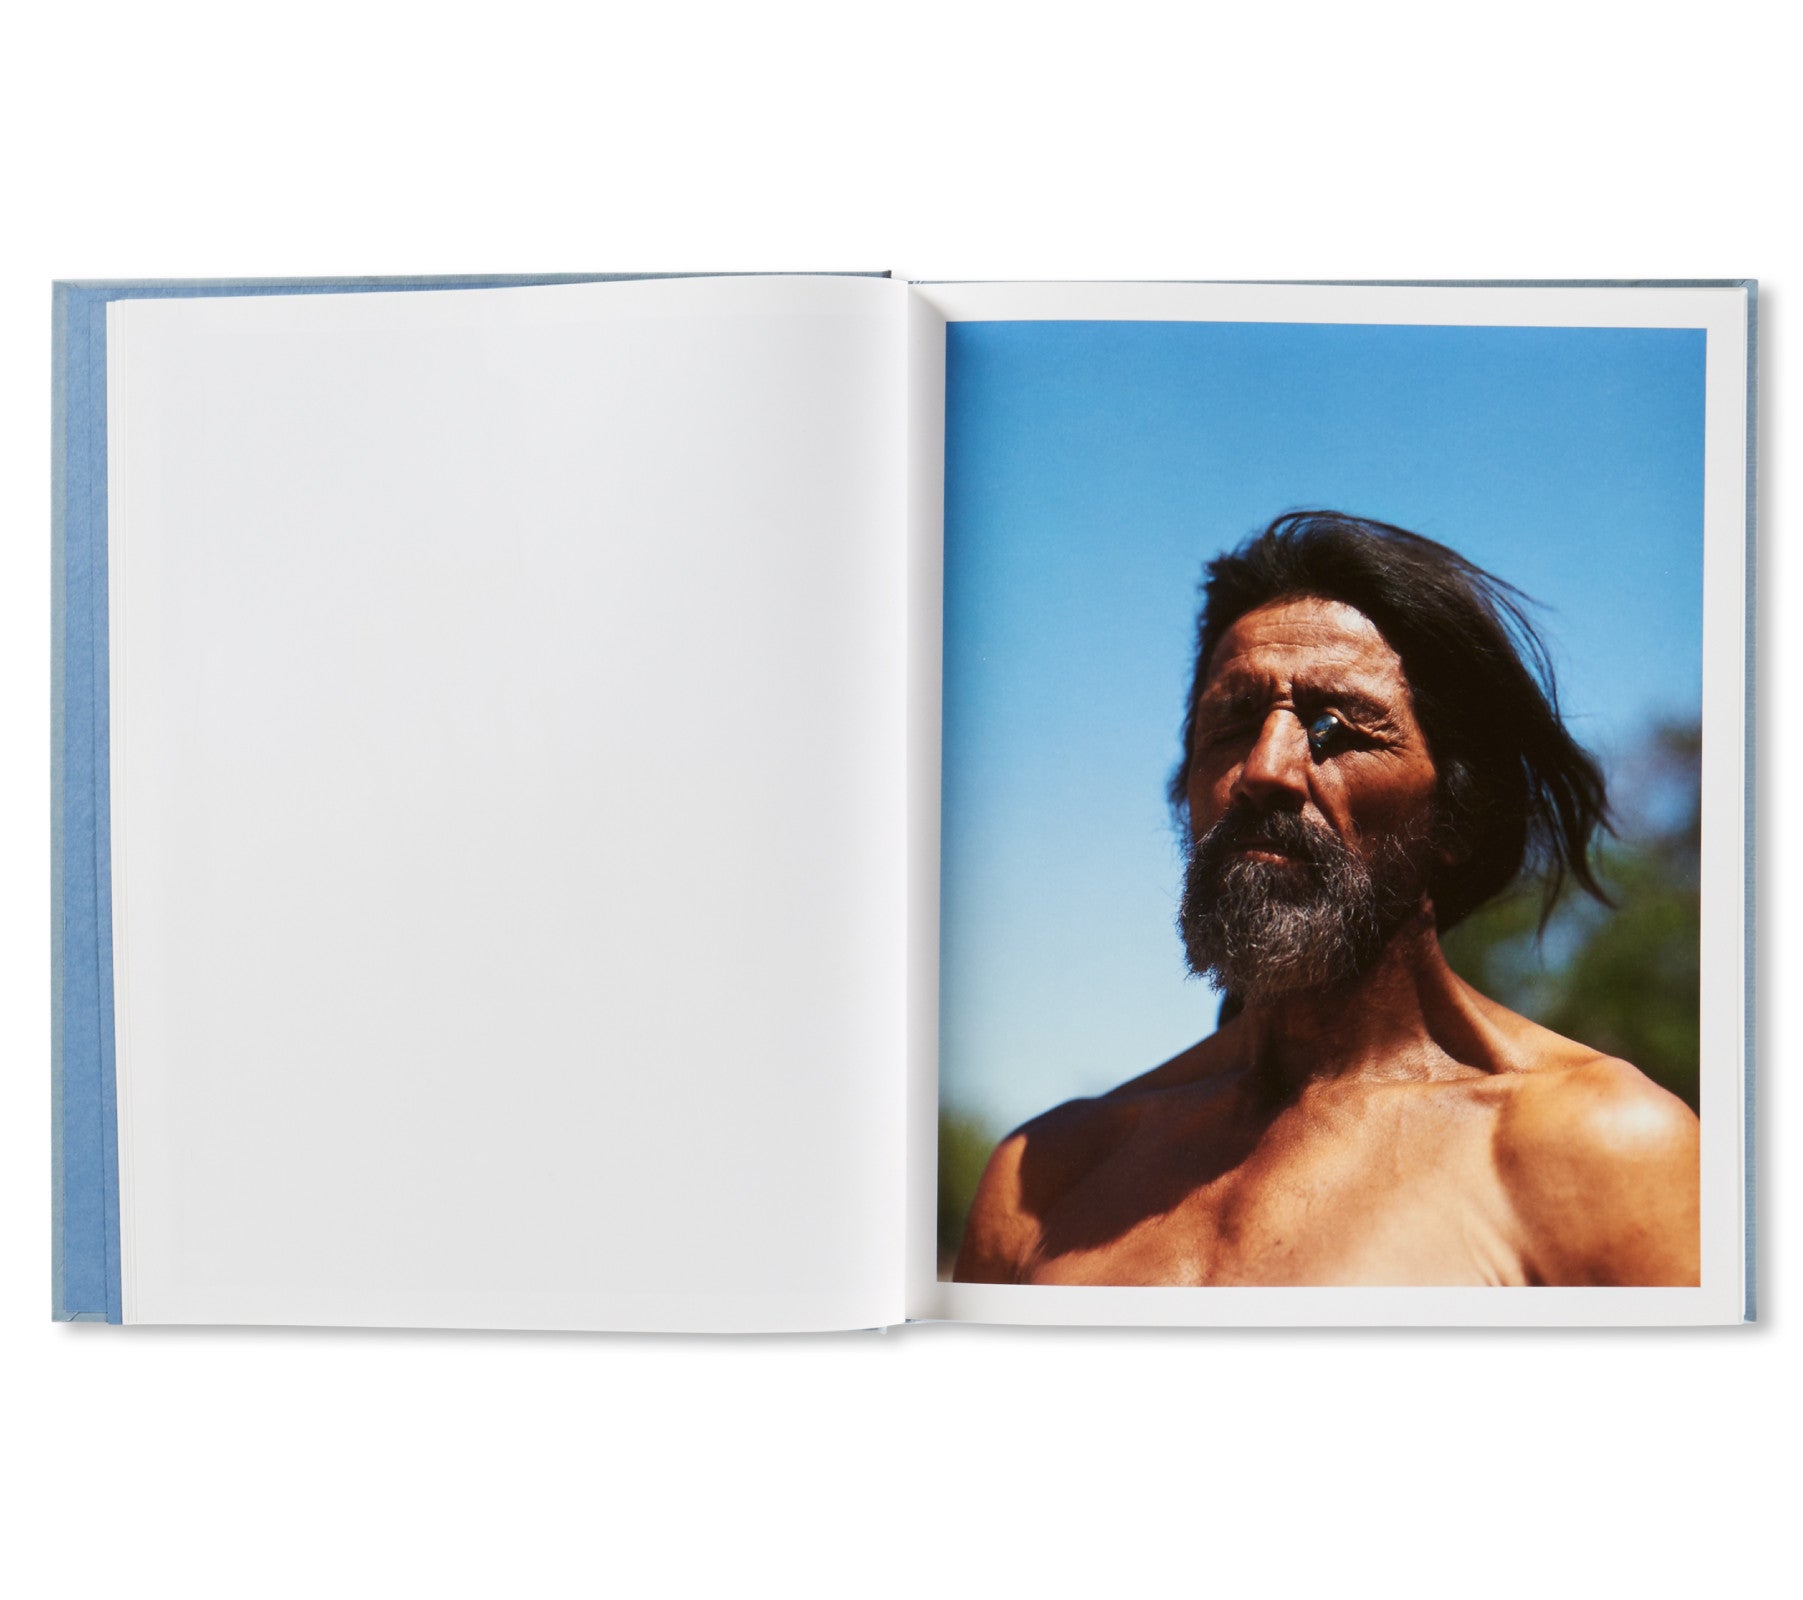 ZZYZX by Gregory Halpern [FIRST EDITION, SECOND PRINTING]